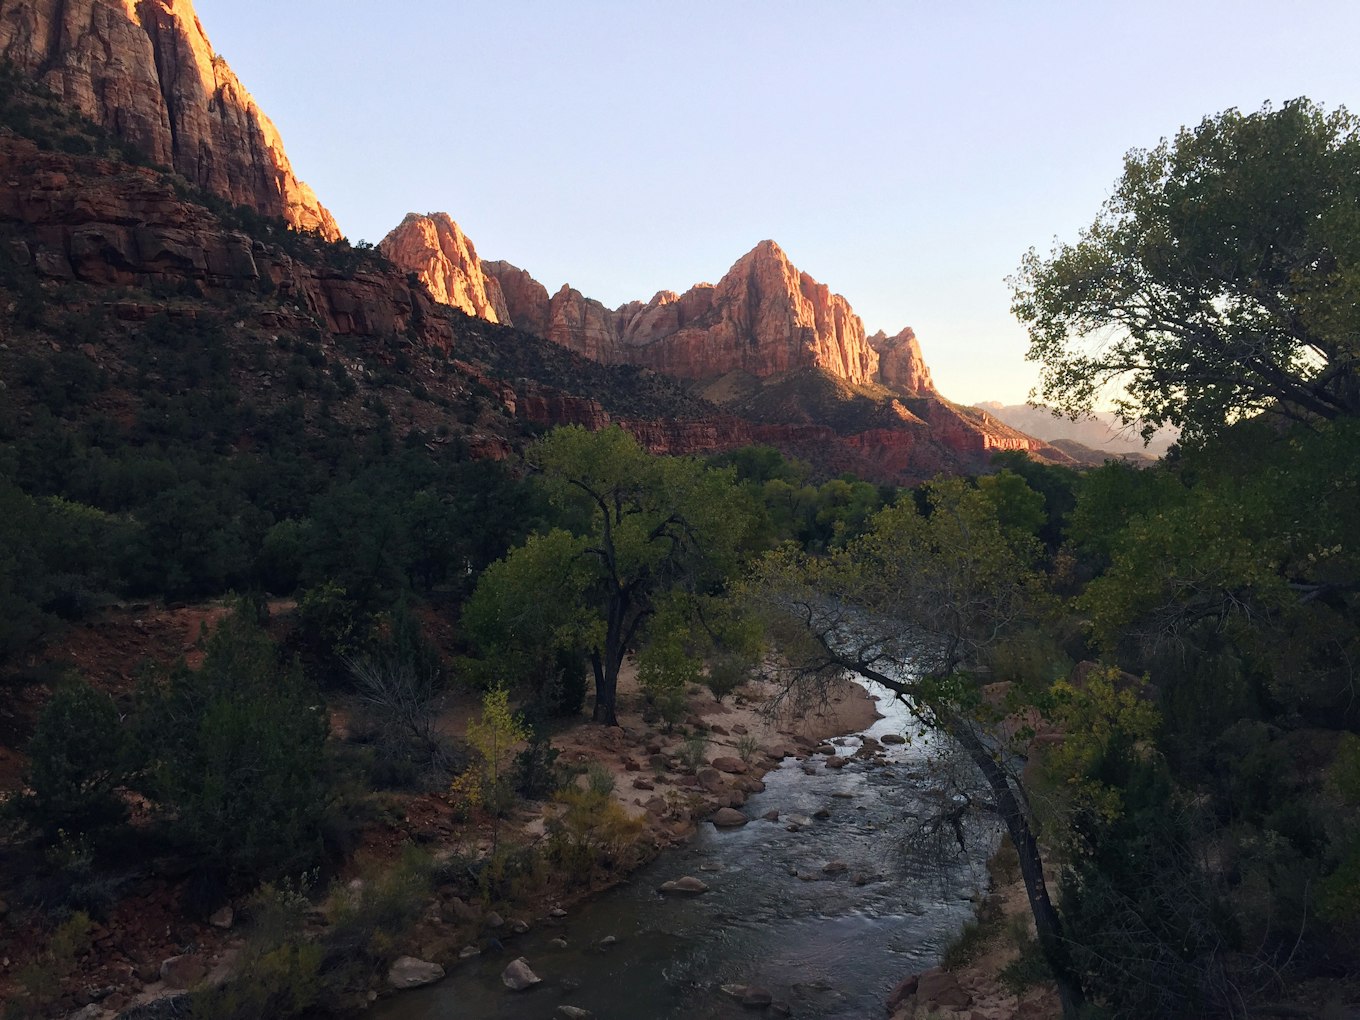 16 Photos from My Week of Adventure in Zion National Park